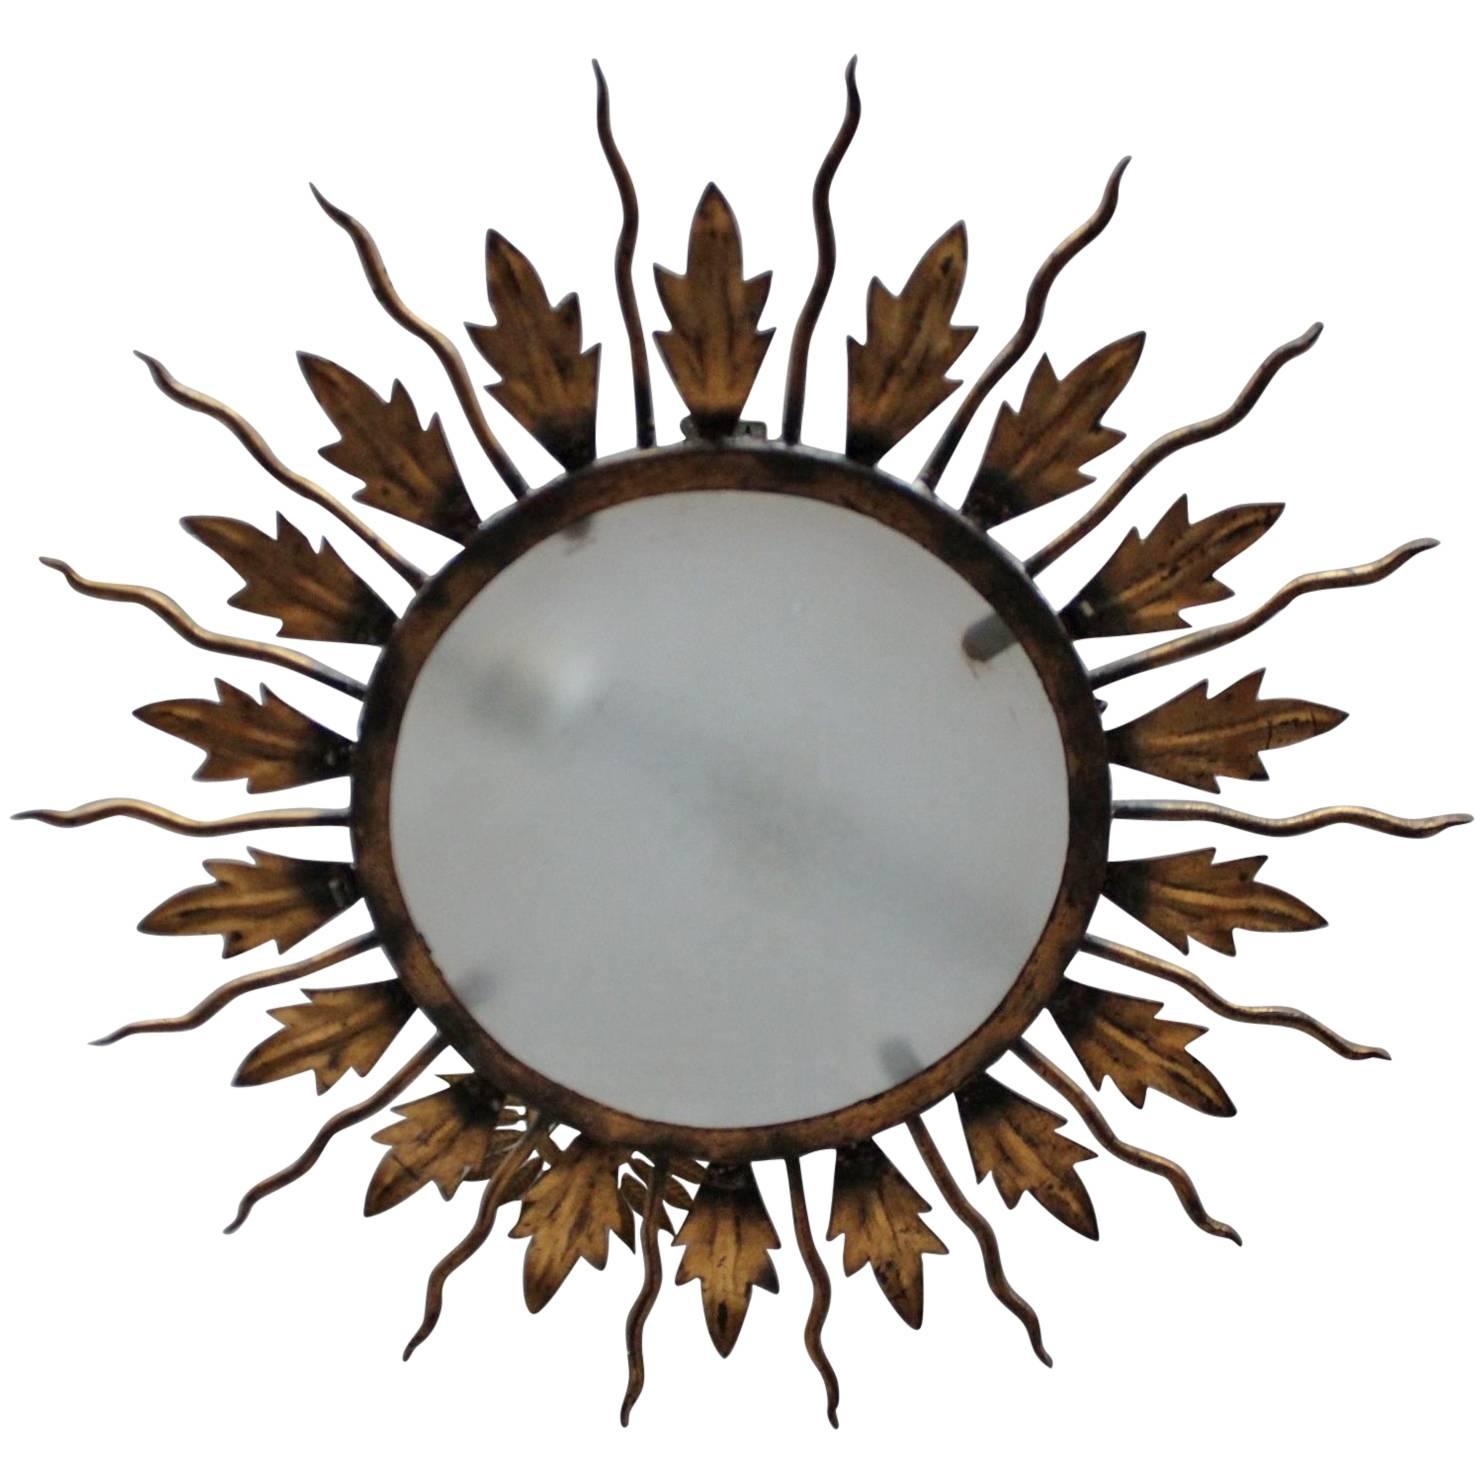 Gilt Metal Flush Mount Ceiling Fixture with Leaves and Rays